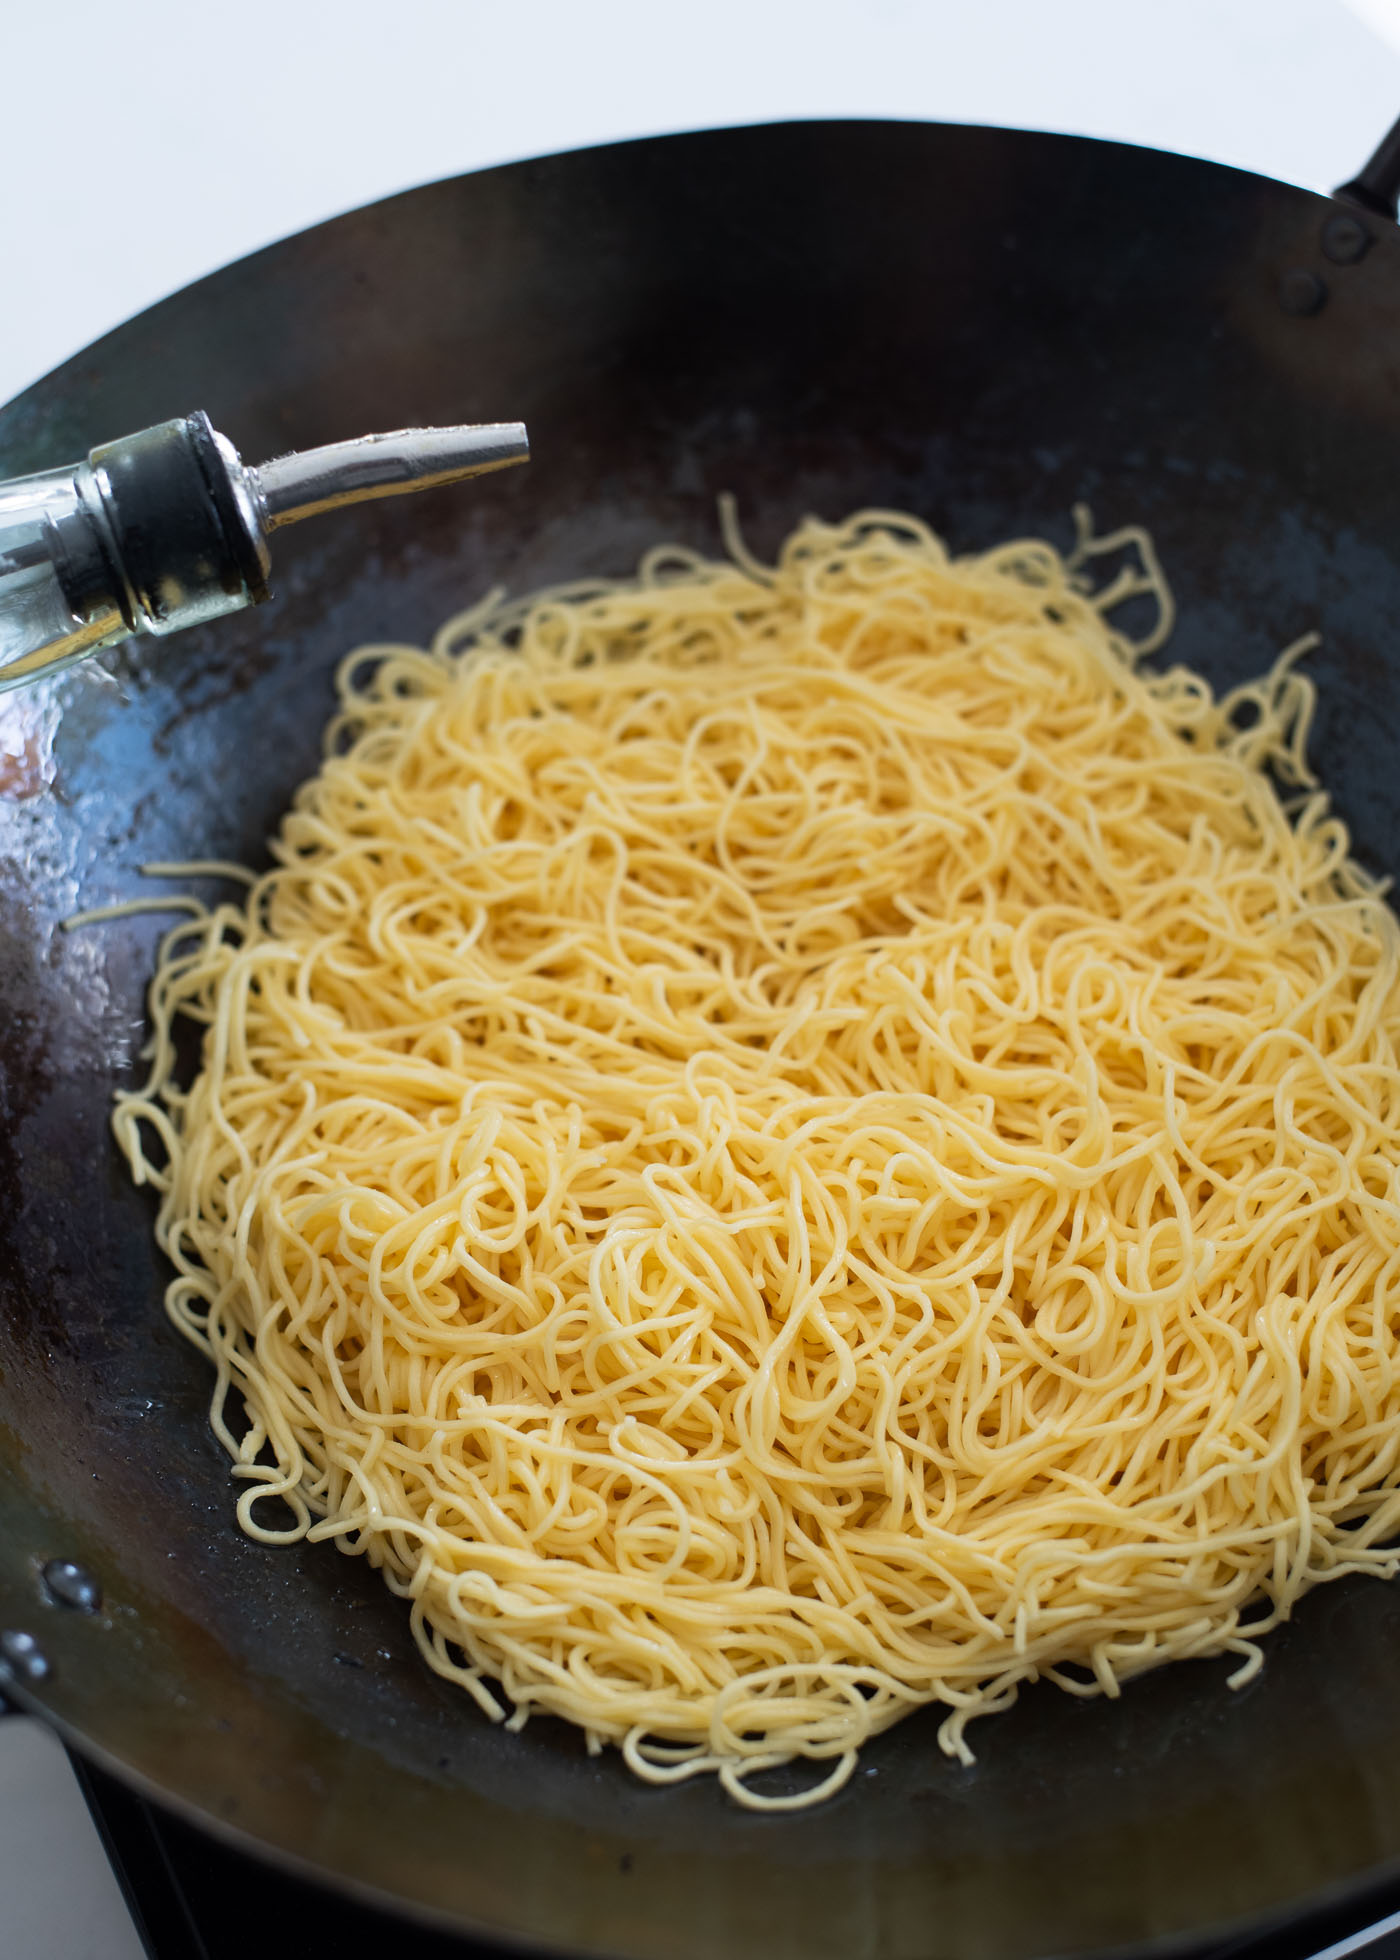 Cooked Cantonese egg noodles (Hong Kong noodles) placed in a wok.